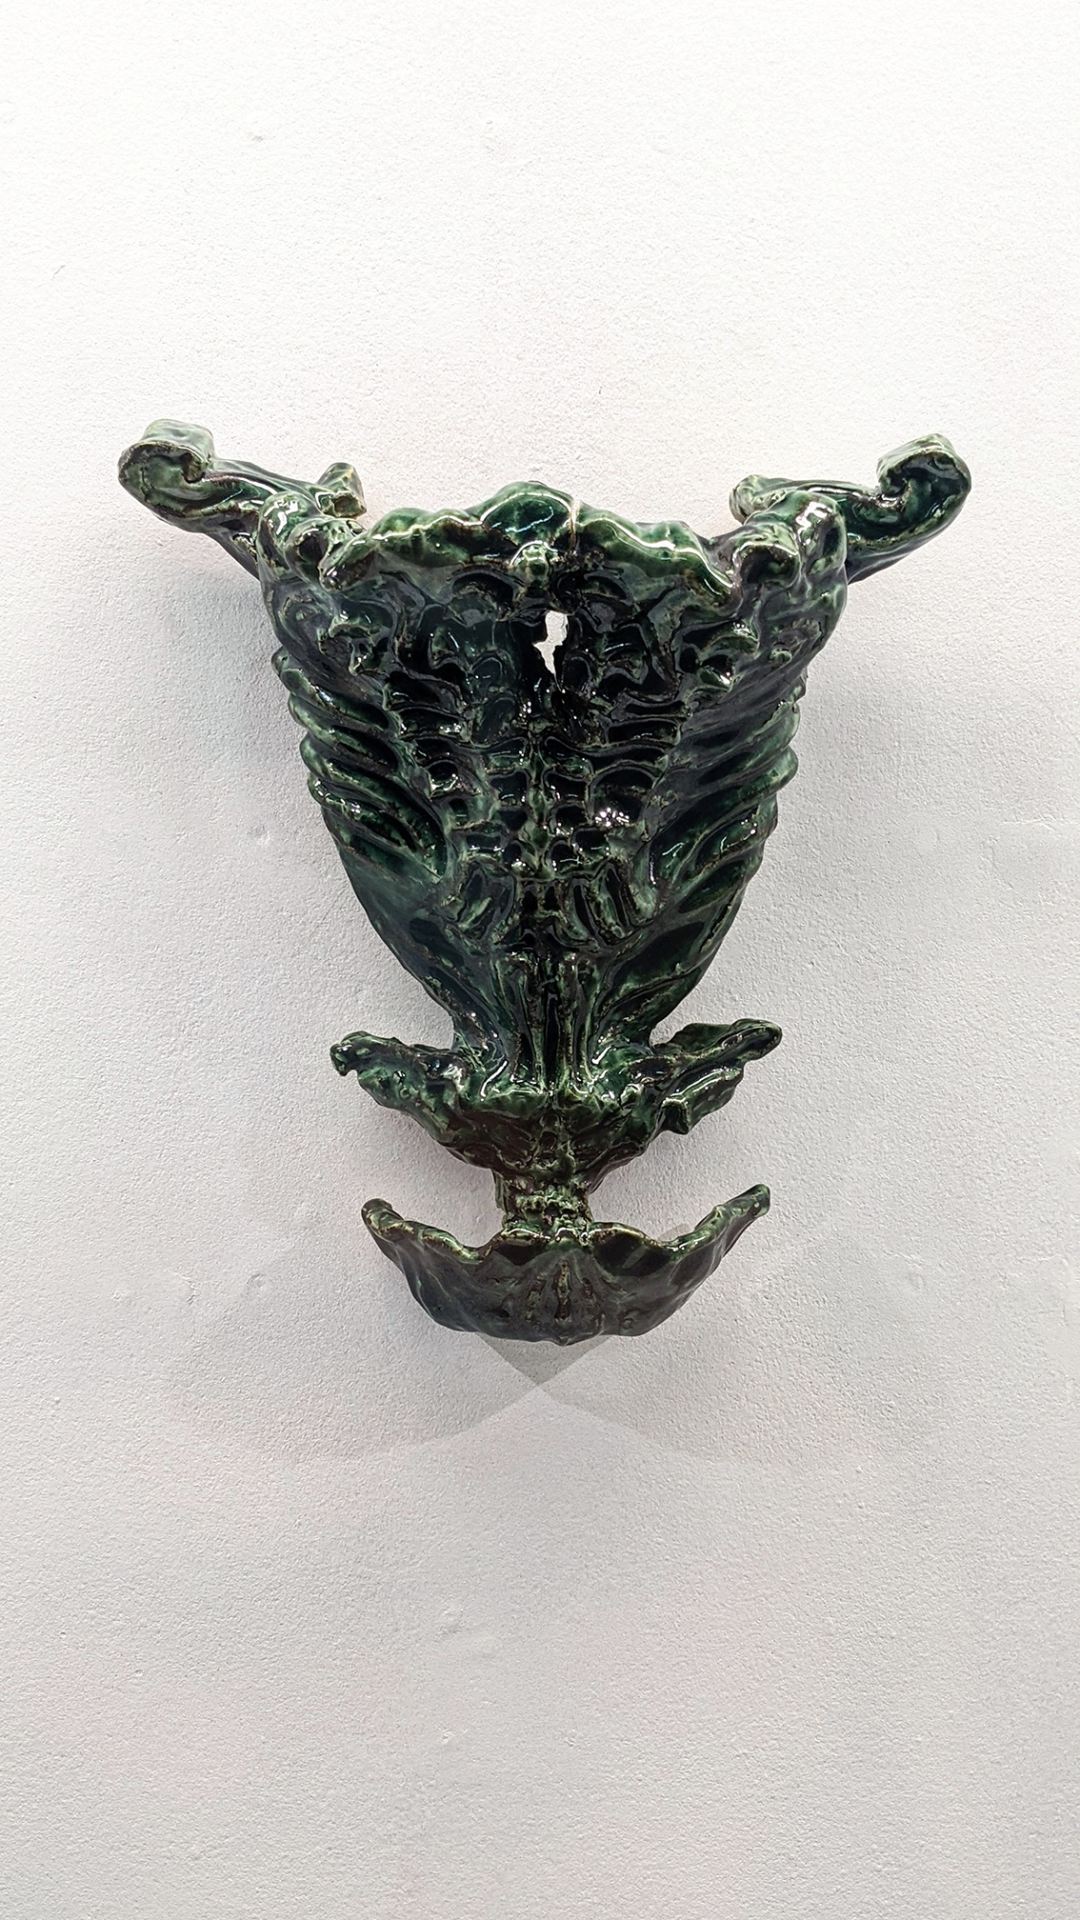 An image of a curvy, green ceramic object hung on a white wall.